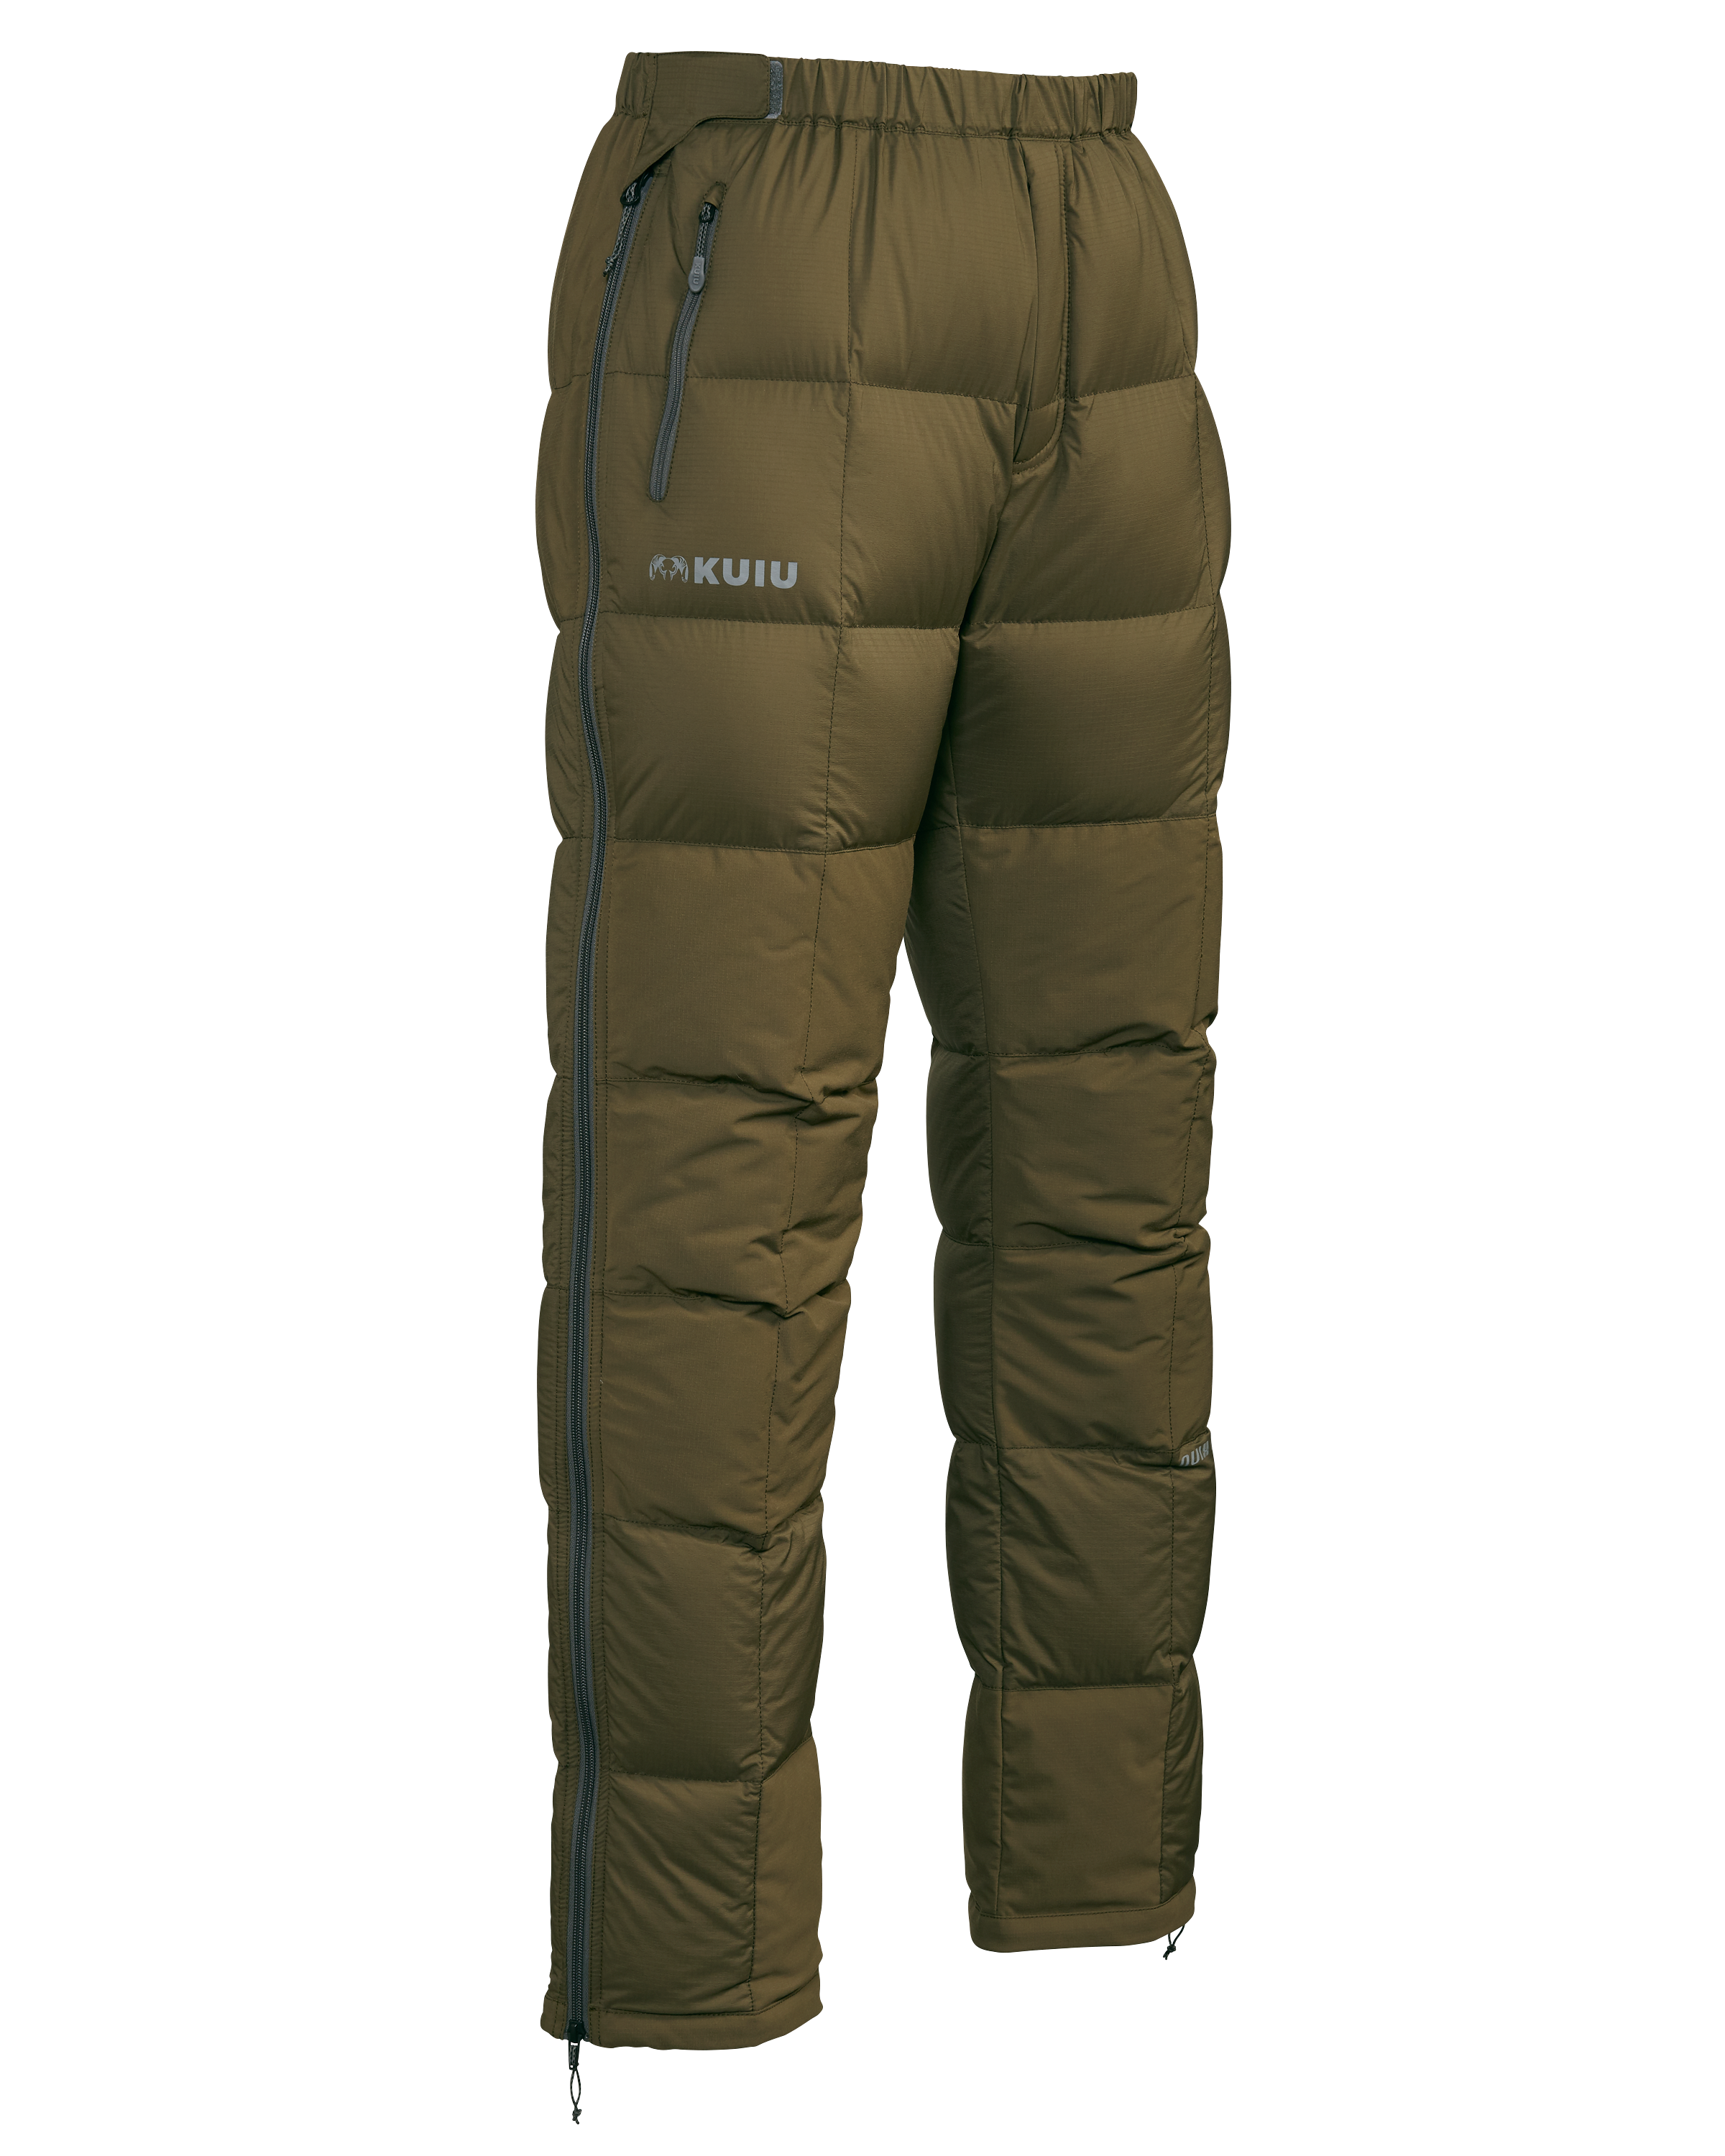 KUIU Super Down PRO Hunting Pant in Bourbon | Size Large